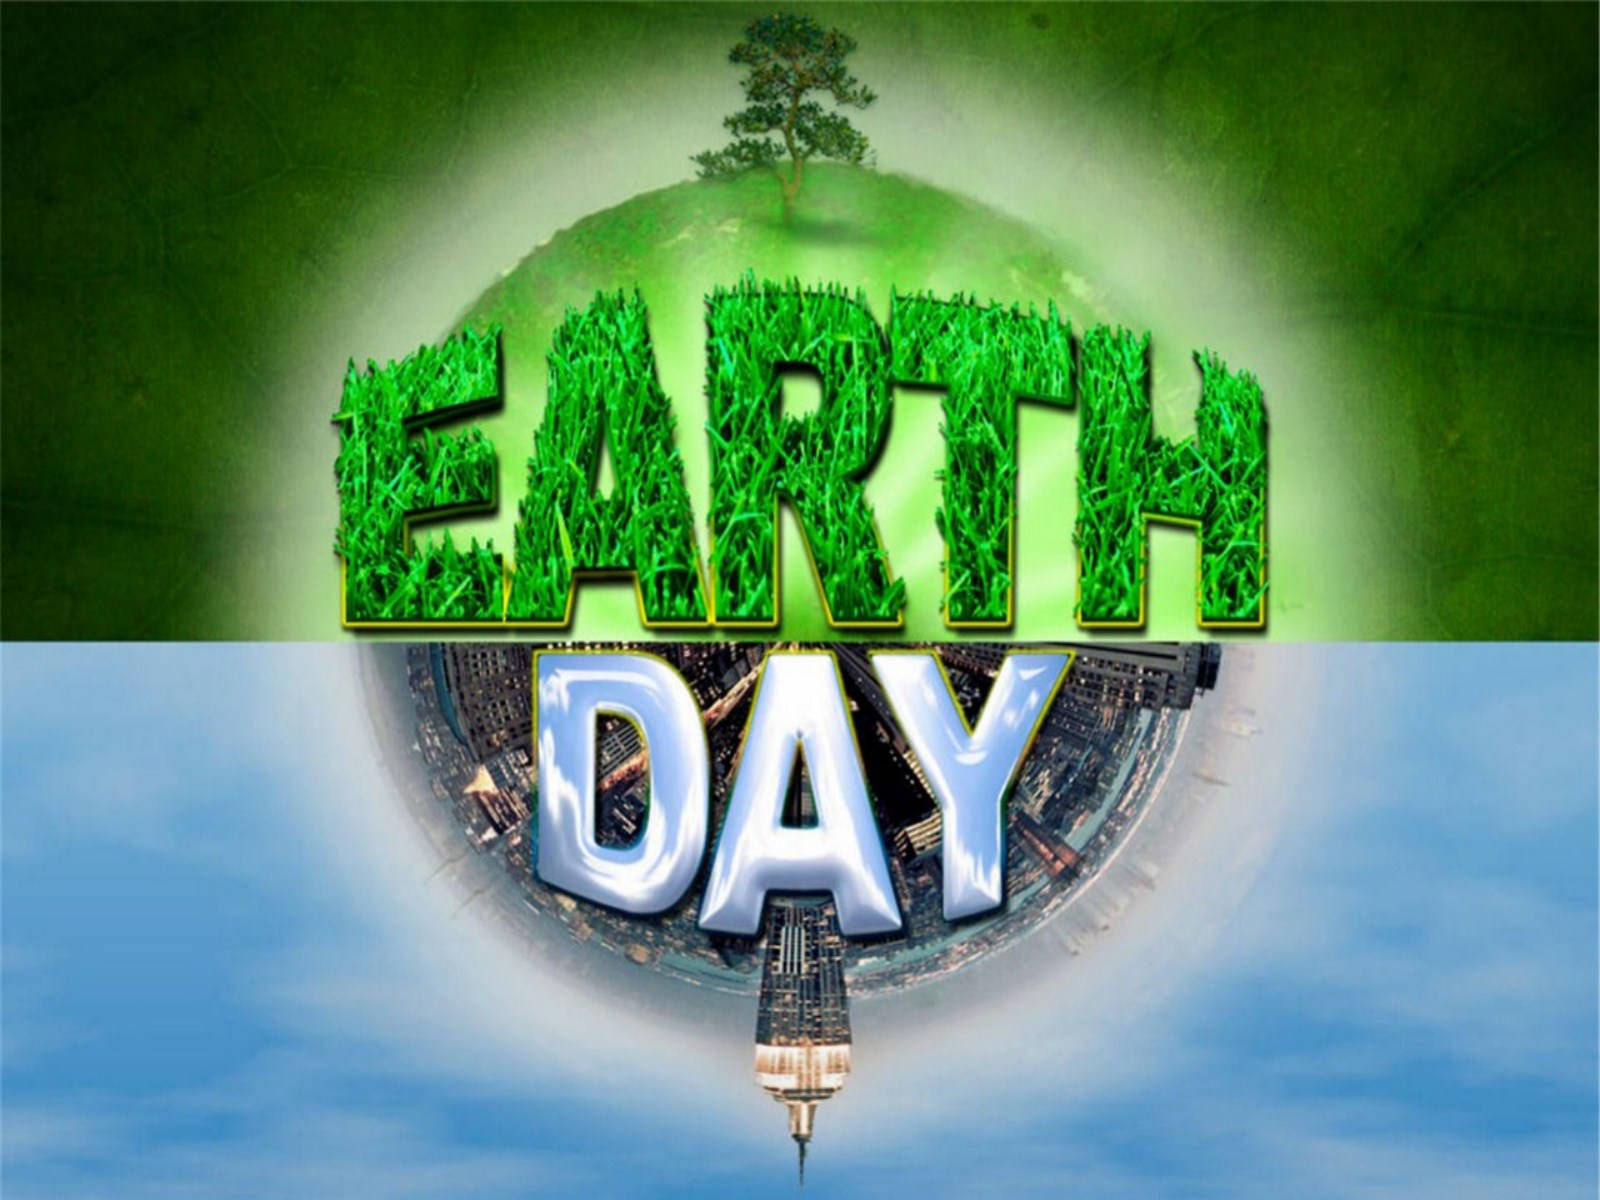 Celebrate Earth Day with Minecraft